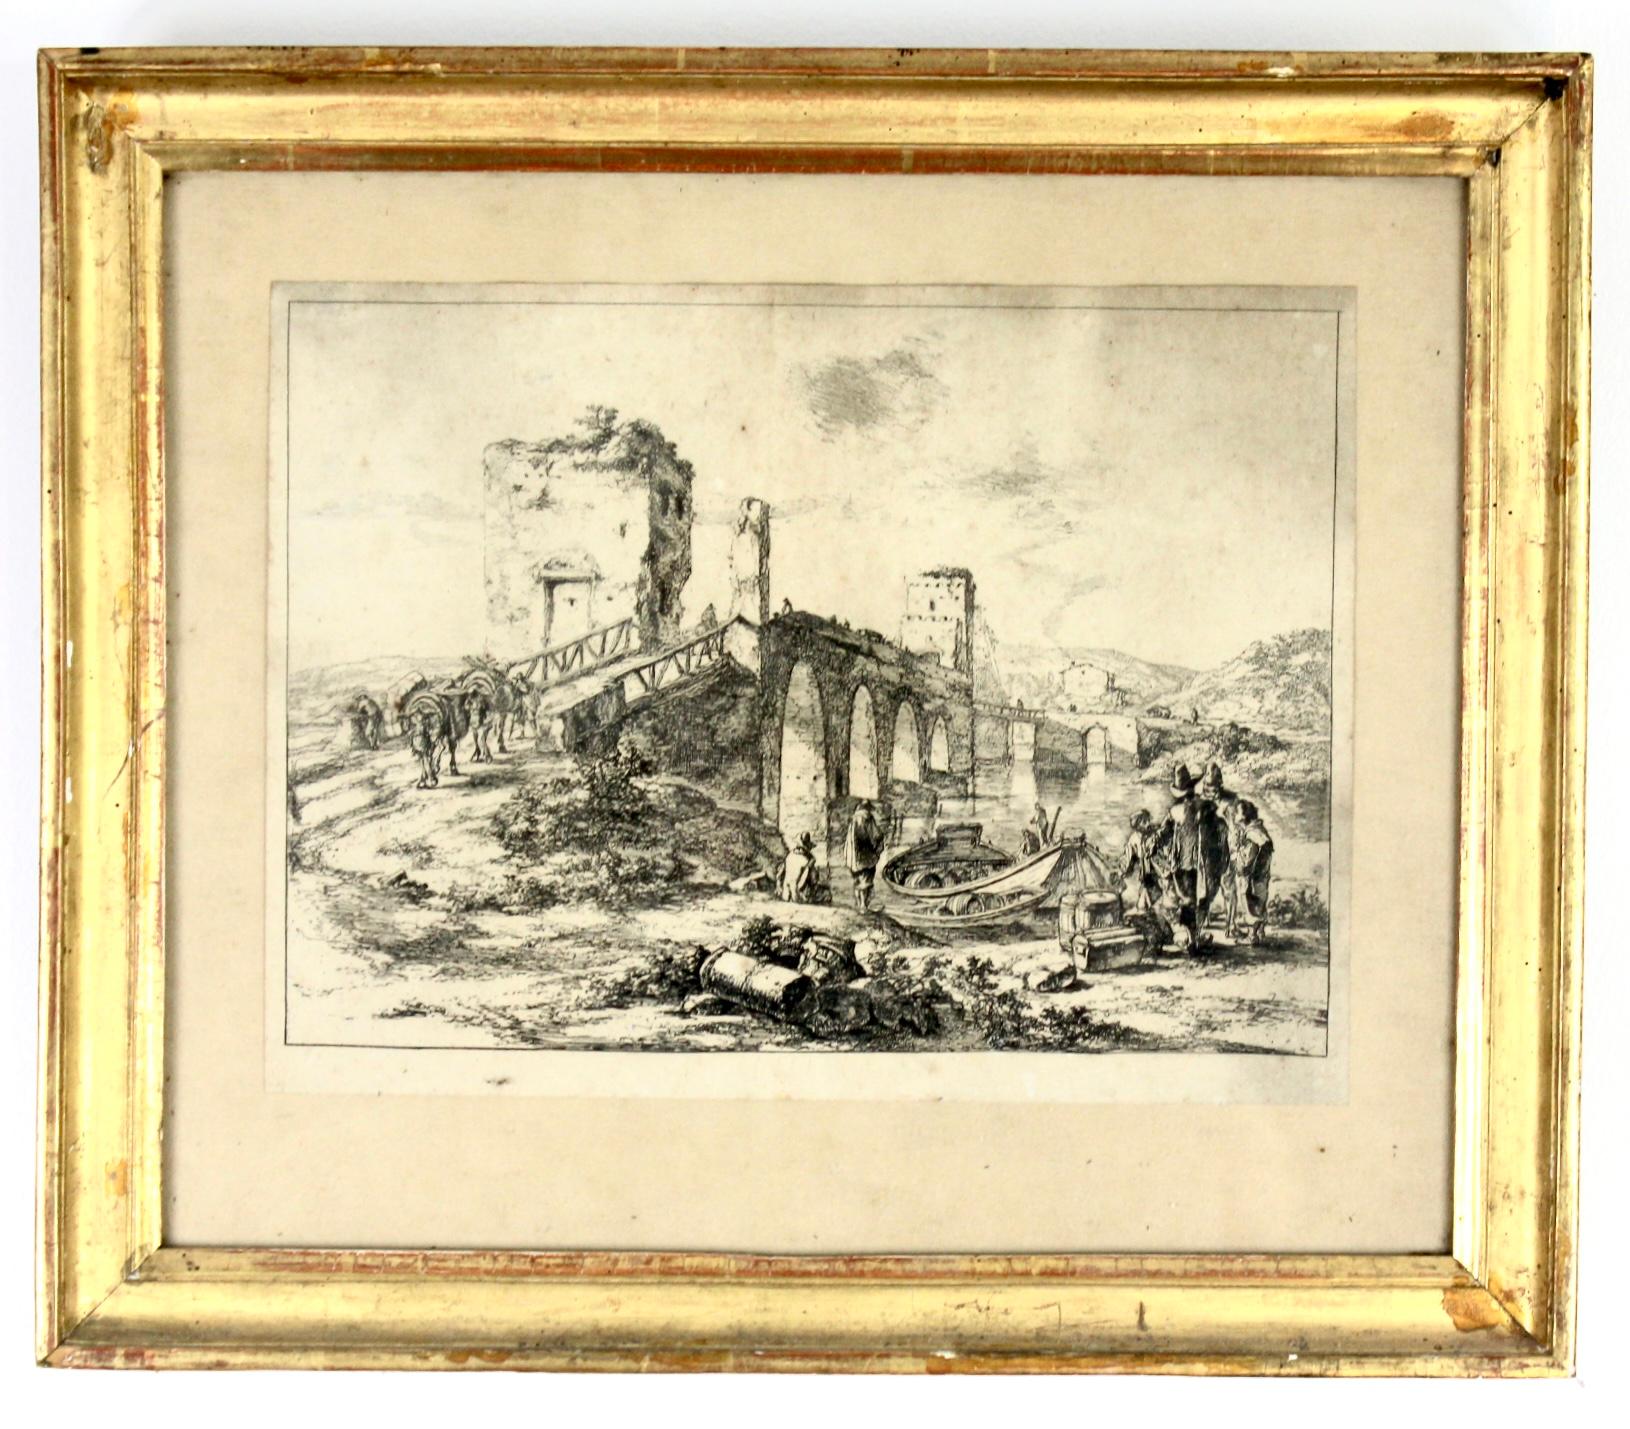 Very nice pair landscape engravings in the taste of the artist Claude le Lorrain. On the first one we can see an ancient bridge in ruins and the other one a mountain landscape by the water.
Sold with frames.